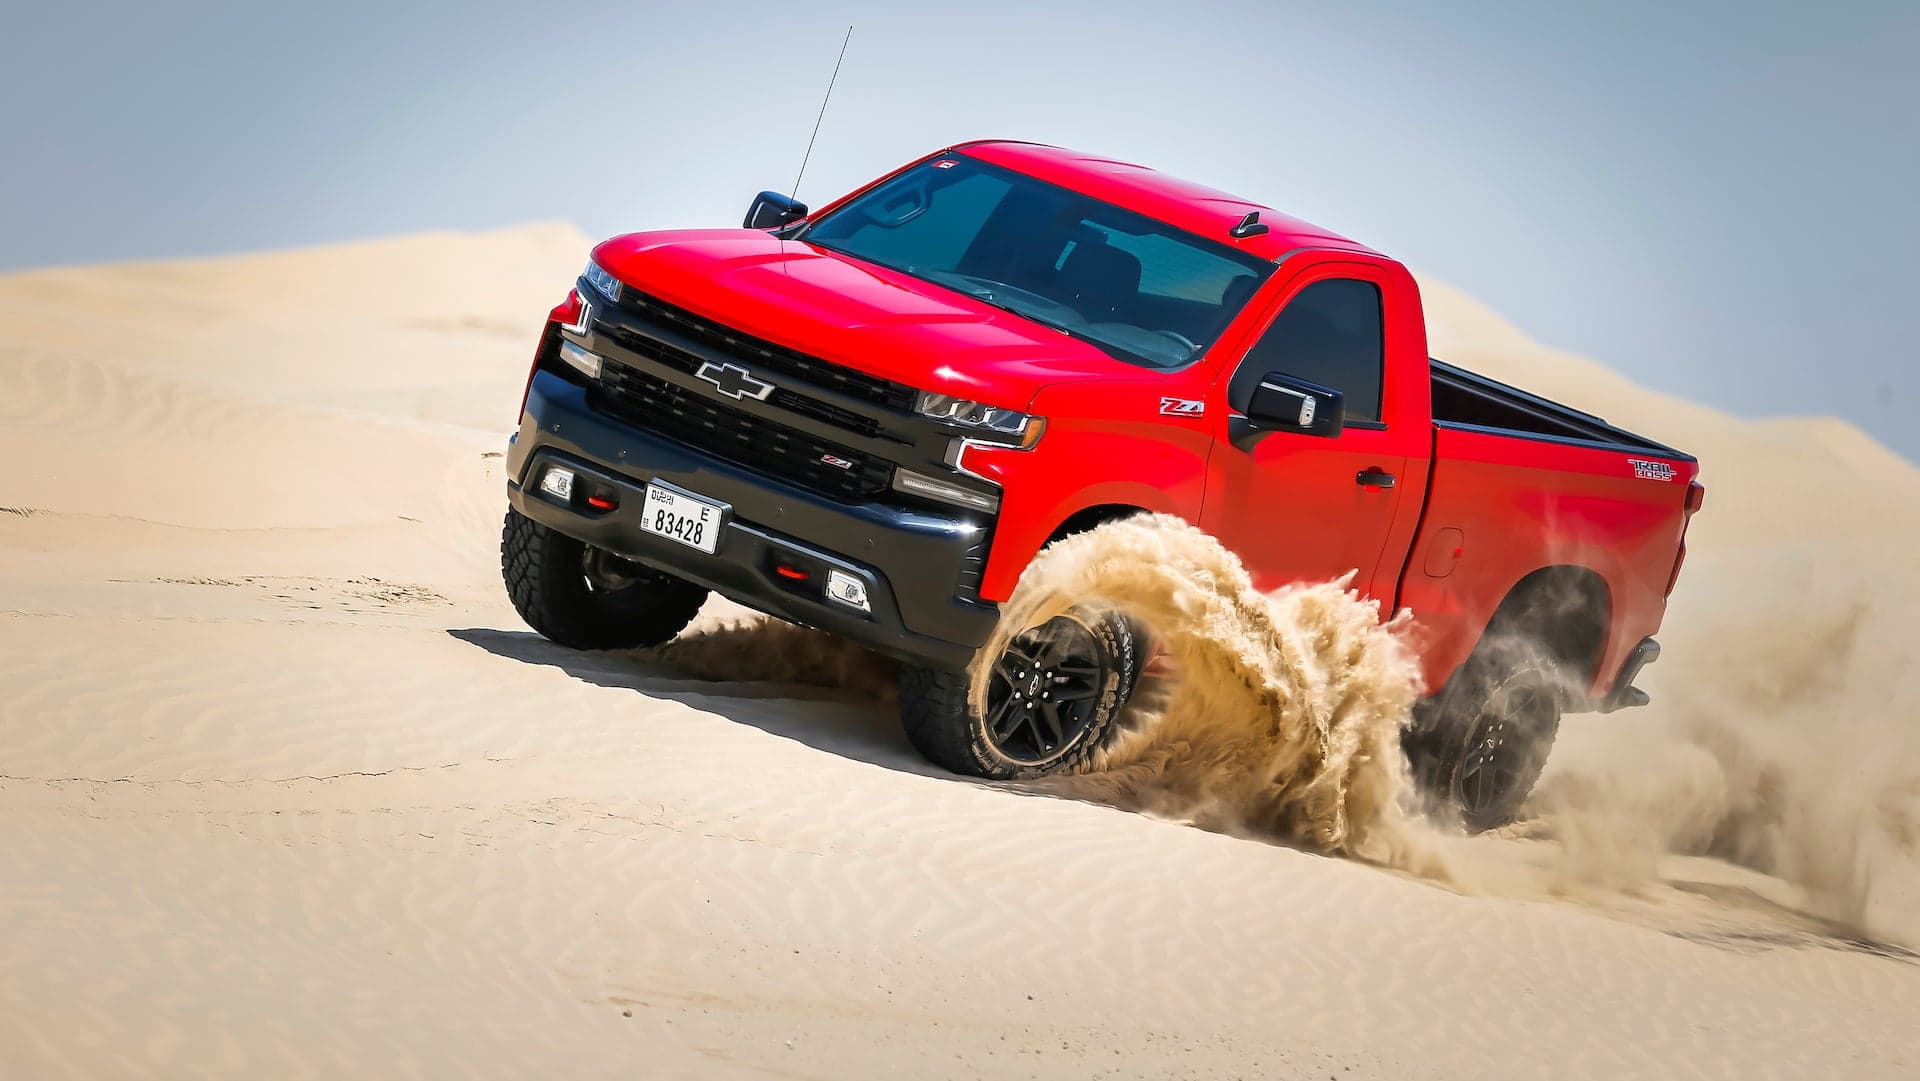 Behold the 2019 Chevrolet Silverado Regular Cab GM Won’t Bring to the US